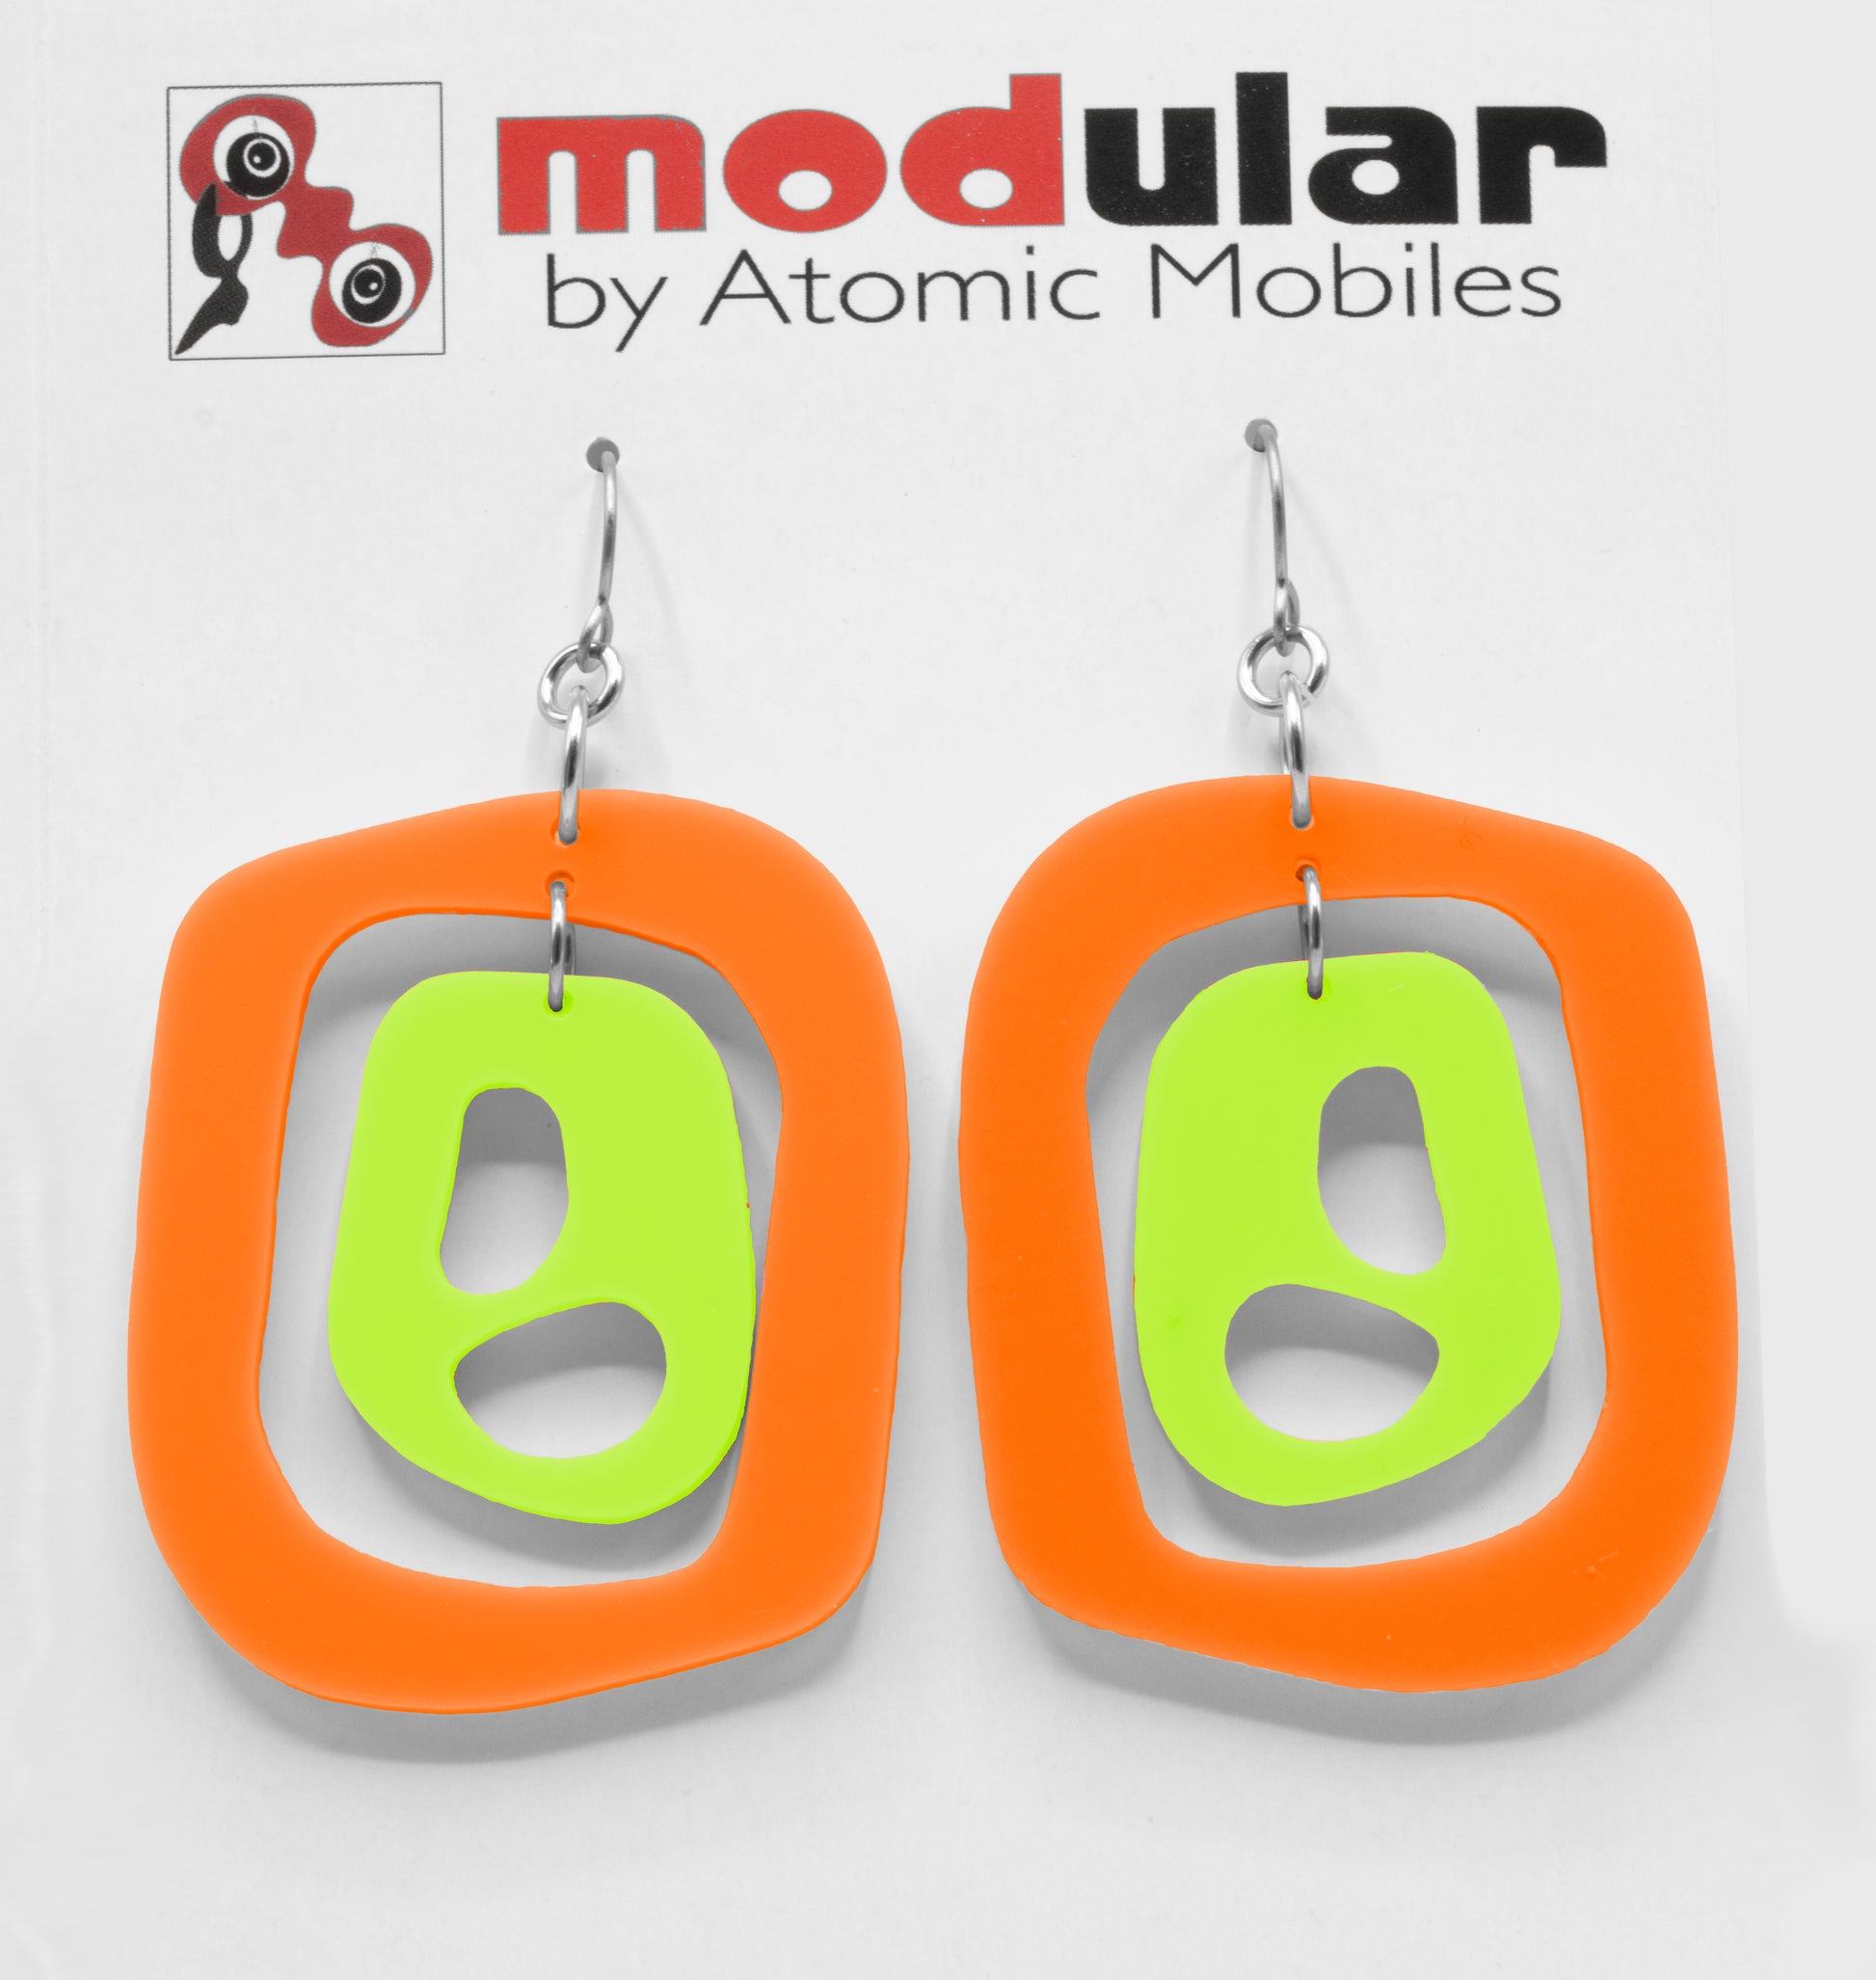 MODular Earrings - Mid 20th Statement Earrings in Orange and Lime by AtomicMobiles.com - retro era mod handmade jewelry